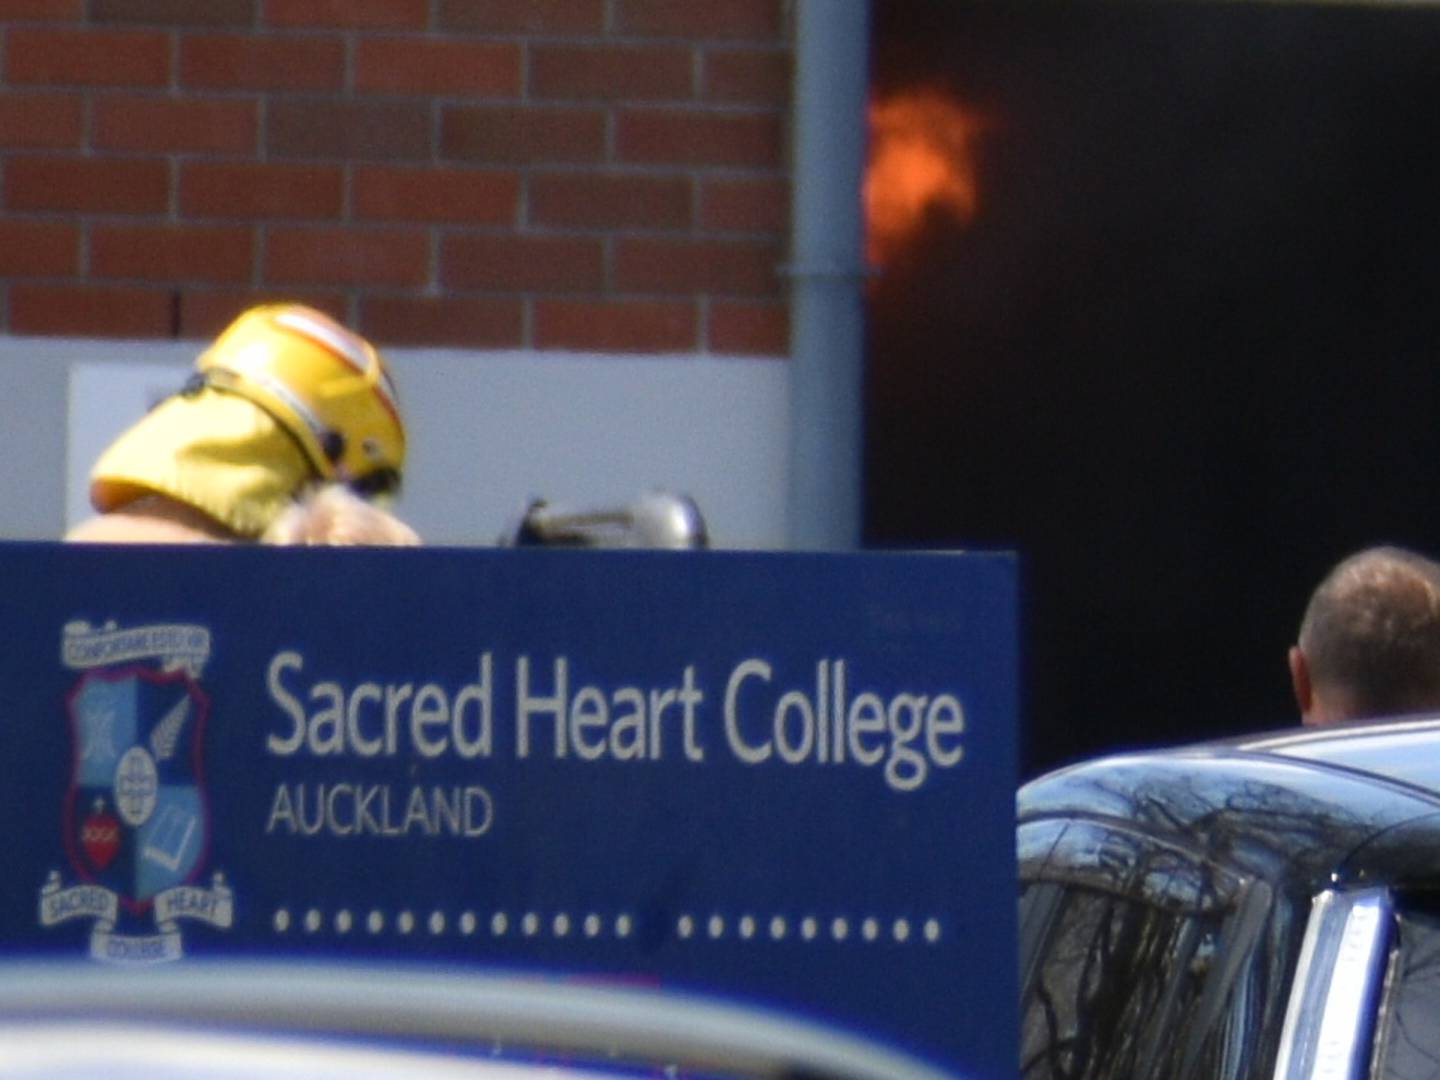 Flames can be seen as firefighters respond to Sacred Heart College in Glendowie. Photo / Darren Masters